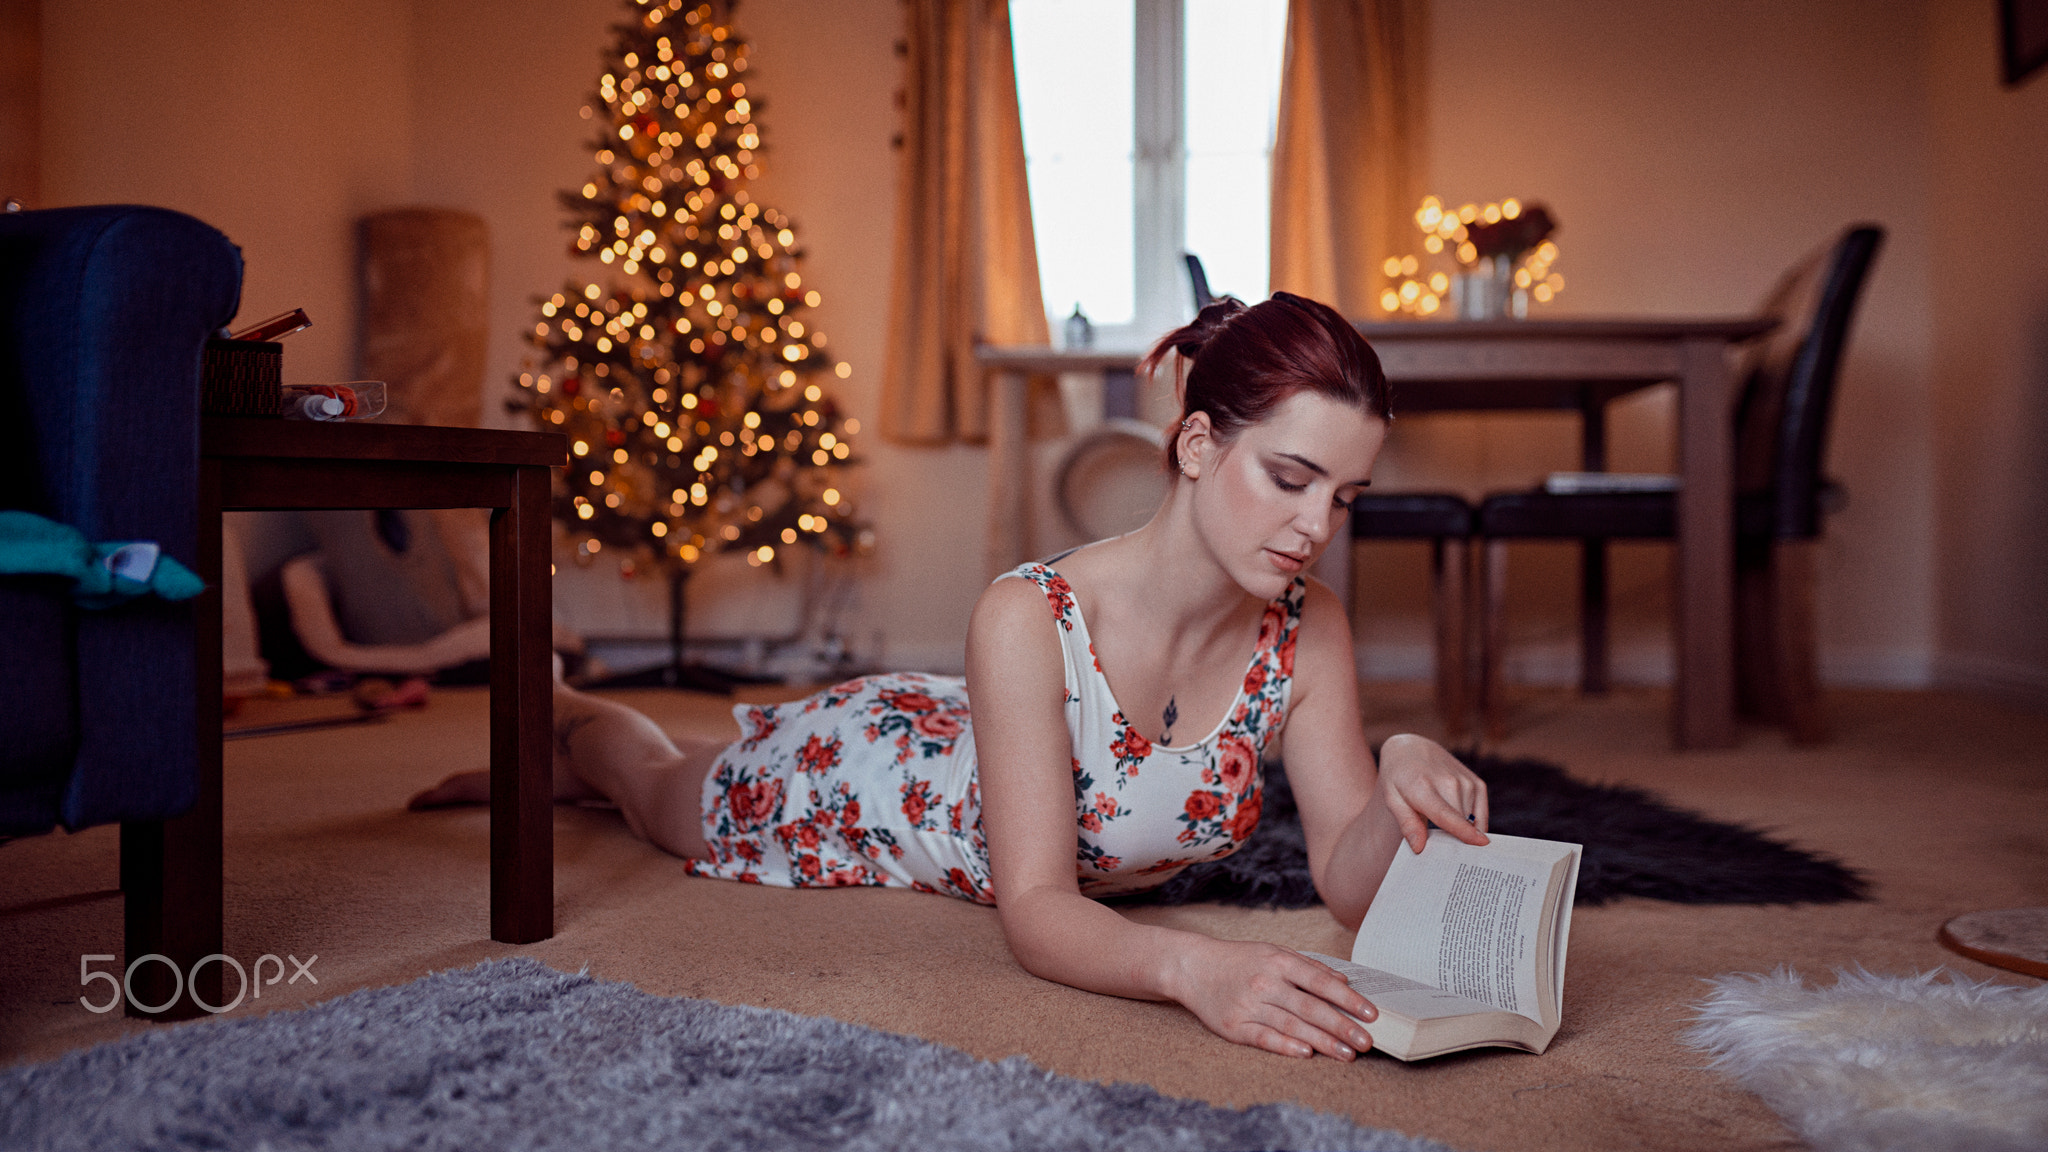 People 2048x1152 Oliver Gibbs 500px photography women model fashion photography flower dress lying on front redhead women indoors hairbun reading